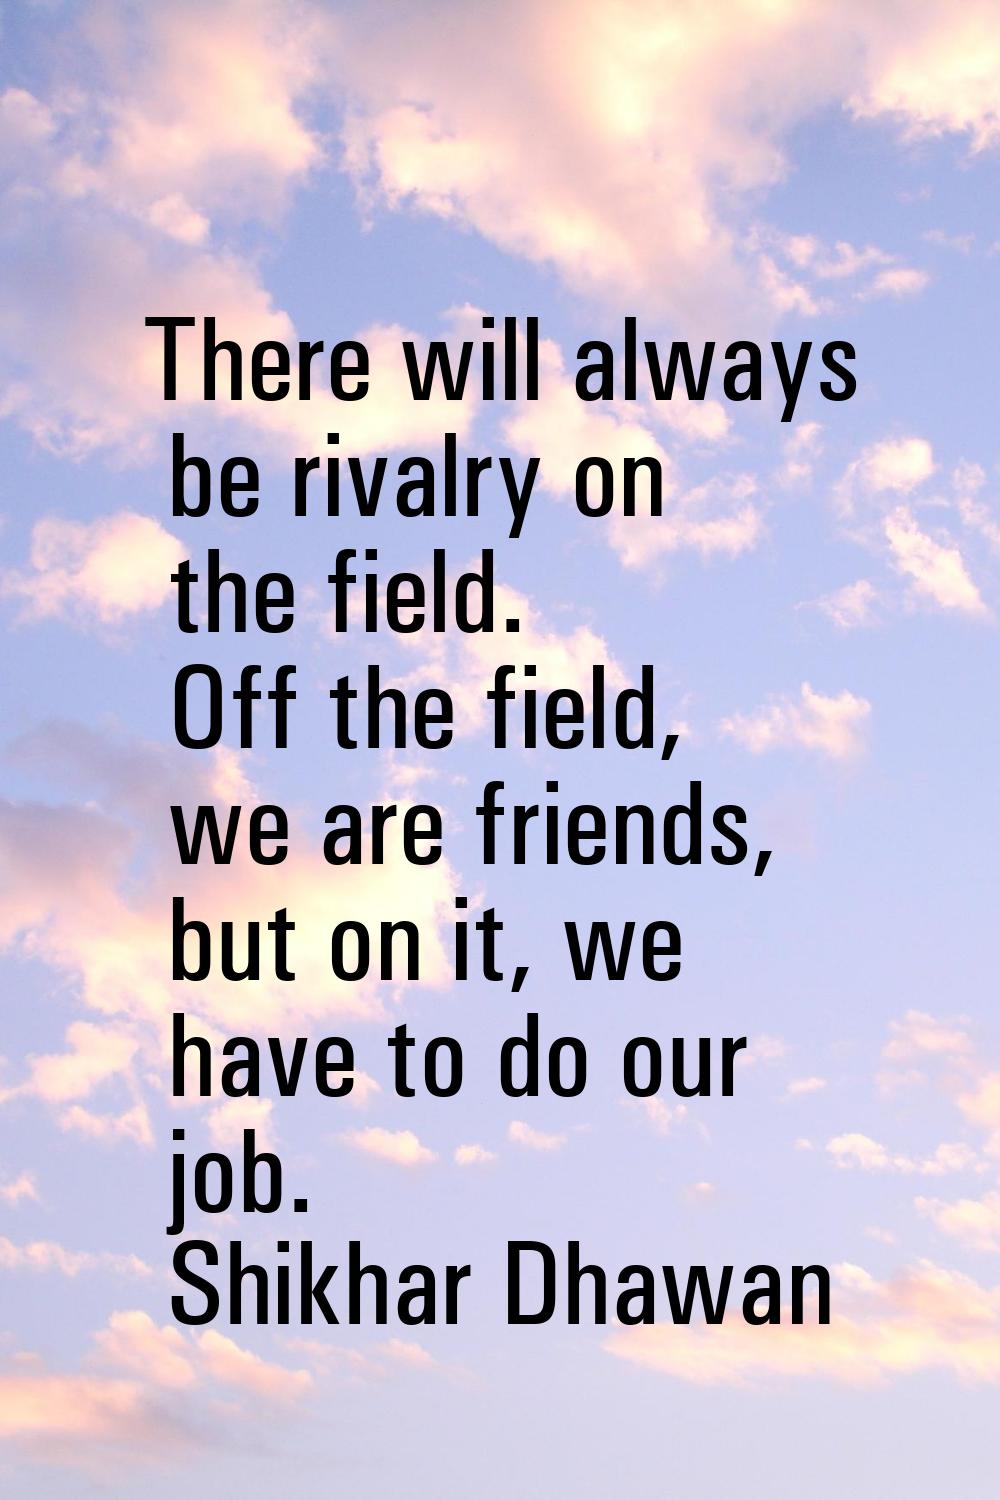 There will always be rivalry on the field. Off the field, we are friends, but on it, we have to do 